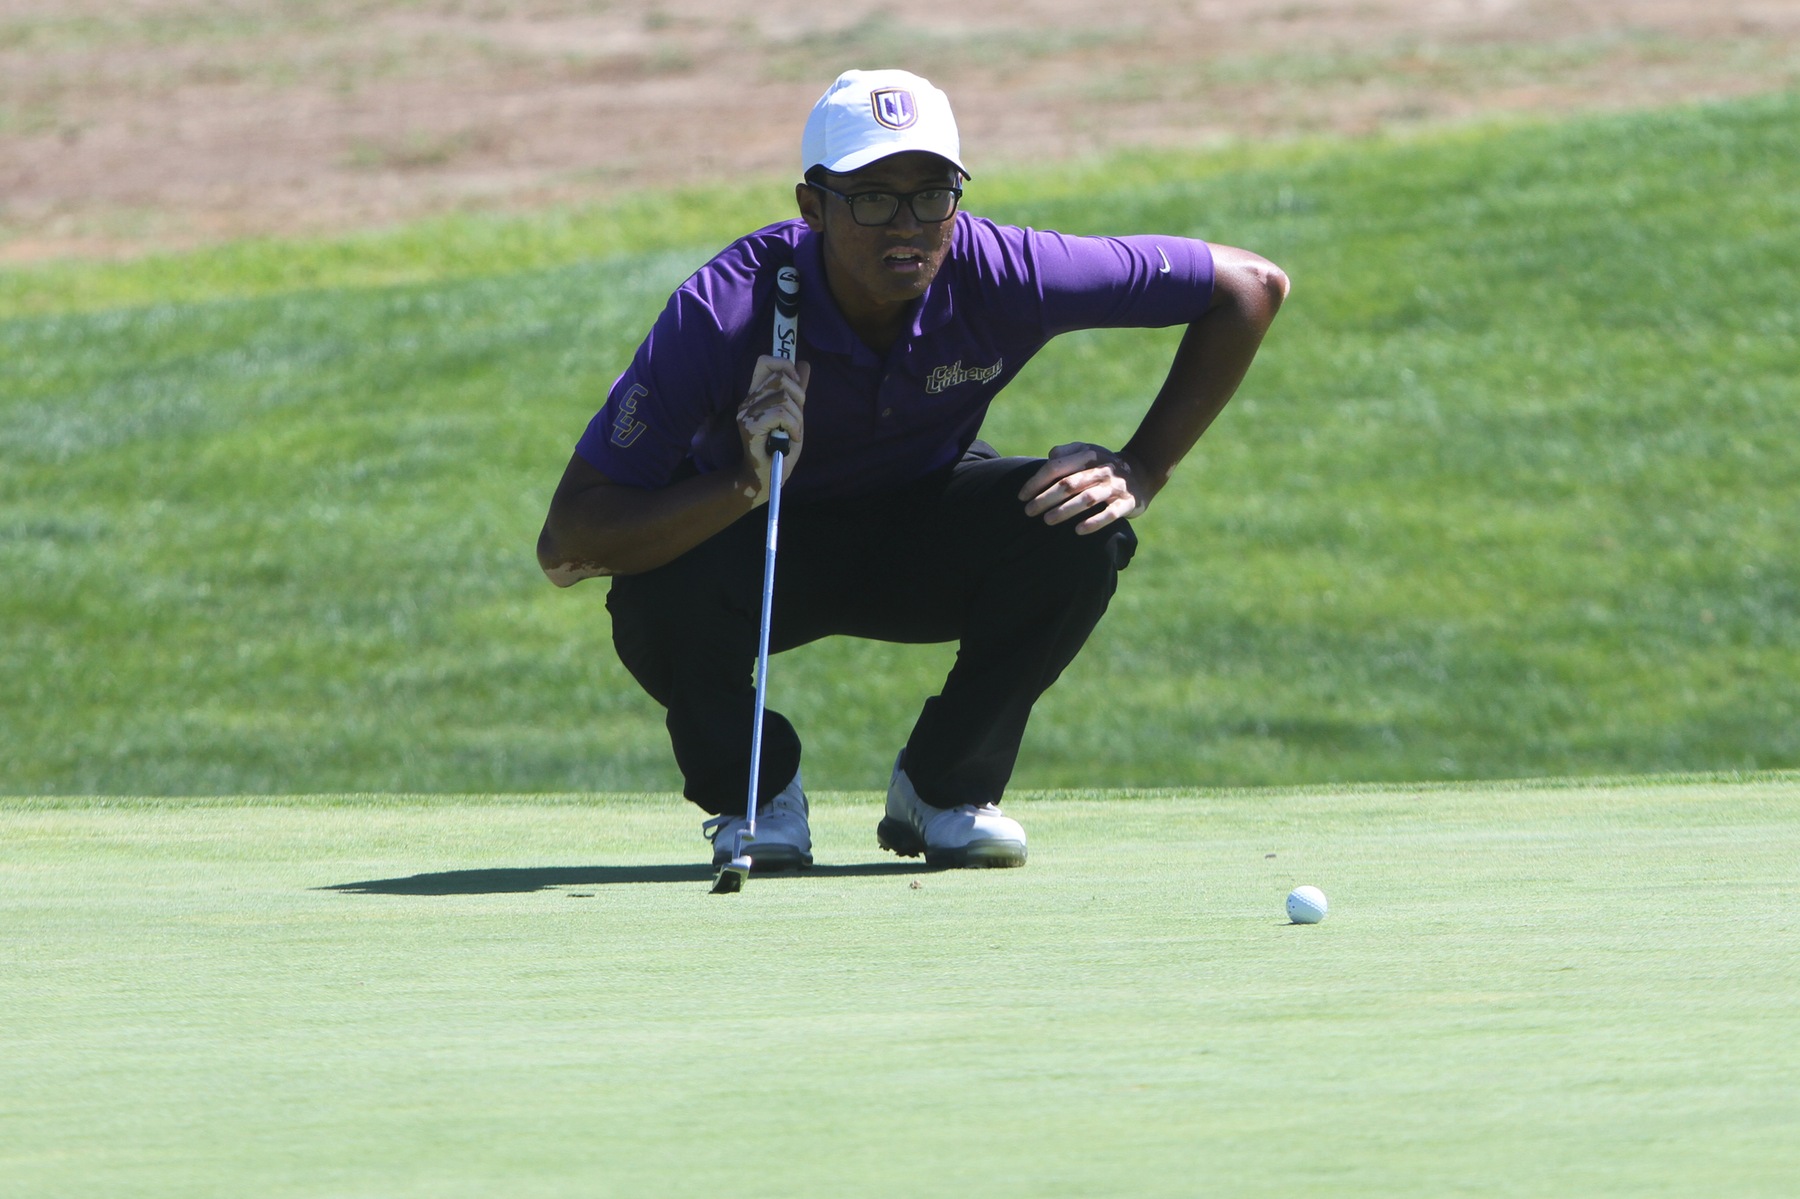 Kyaw Wins Outing Against Panthers